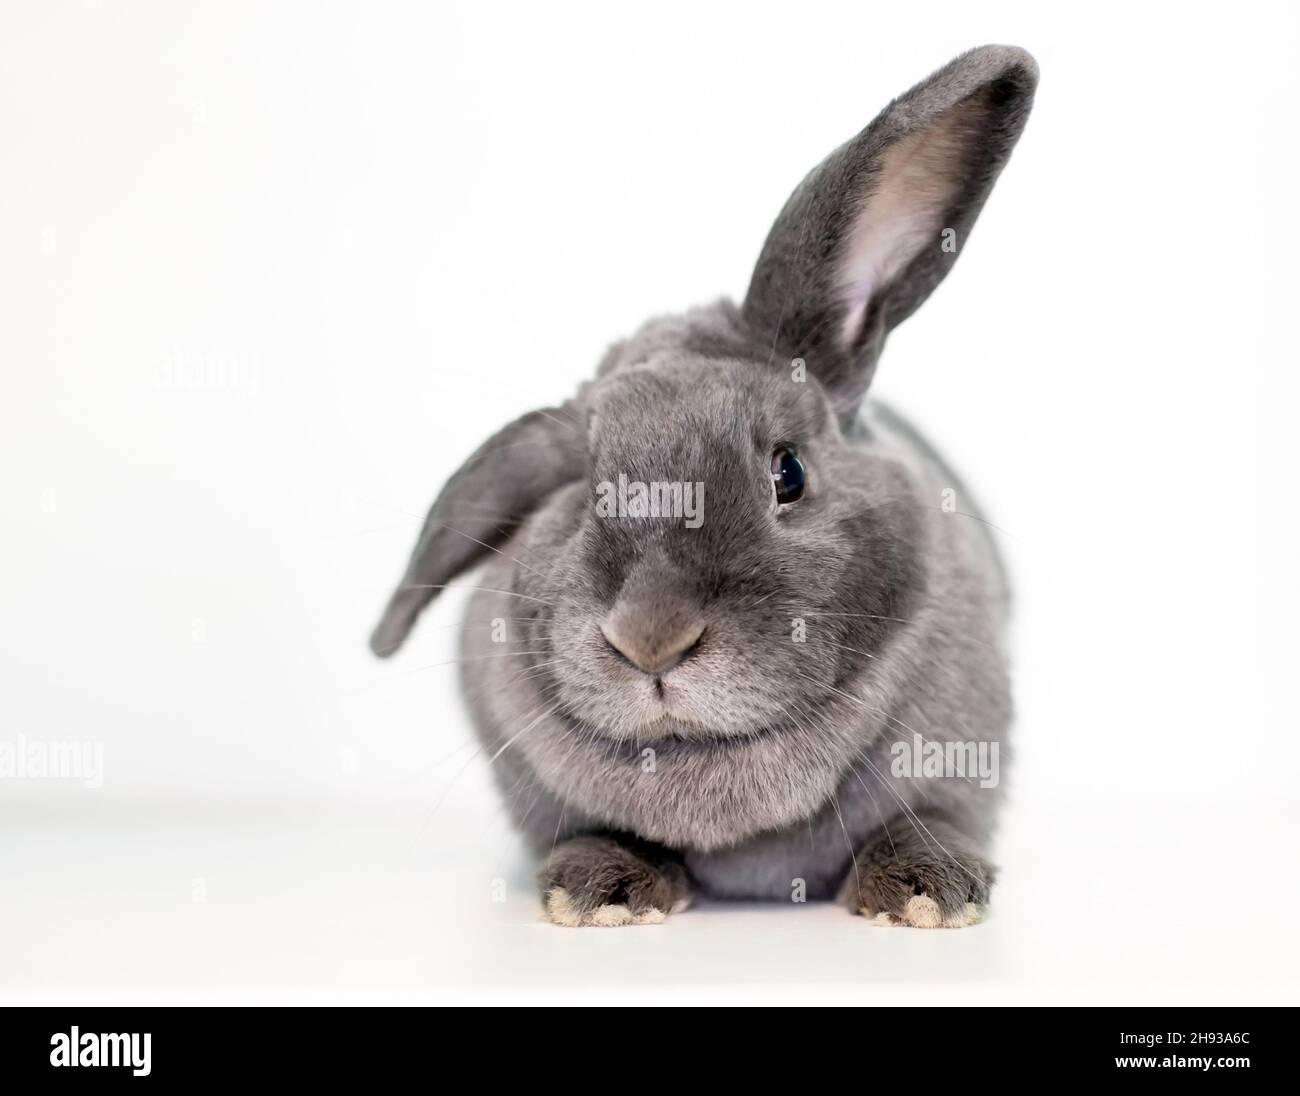 A gray pet rabbit holding its ears in a half lop position Stock Photo